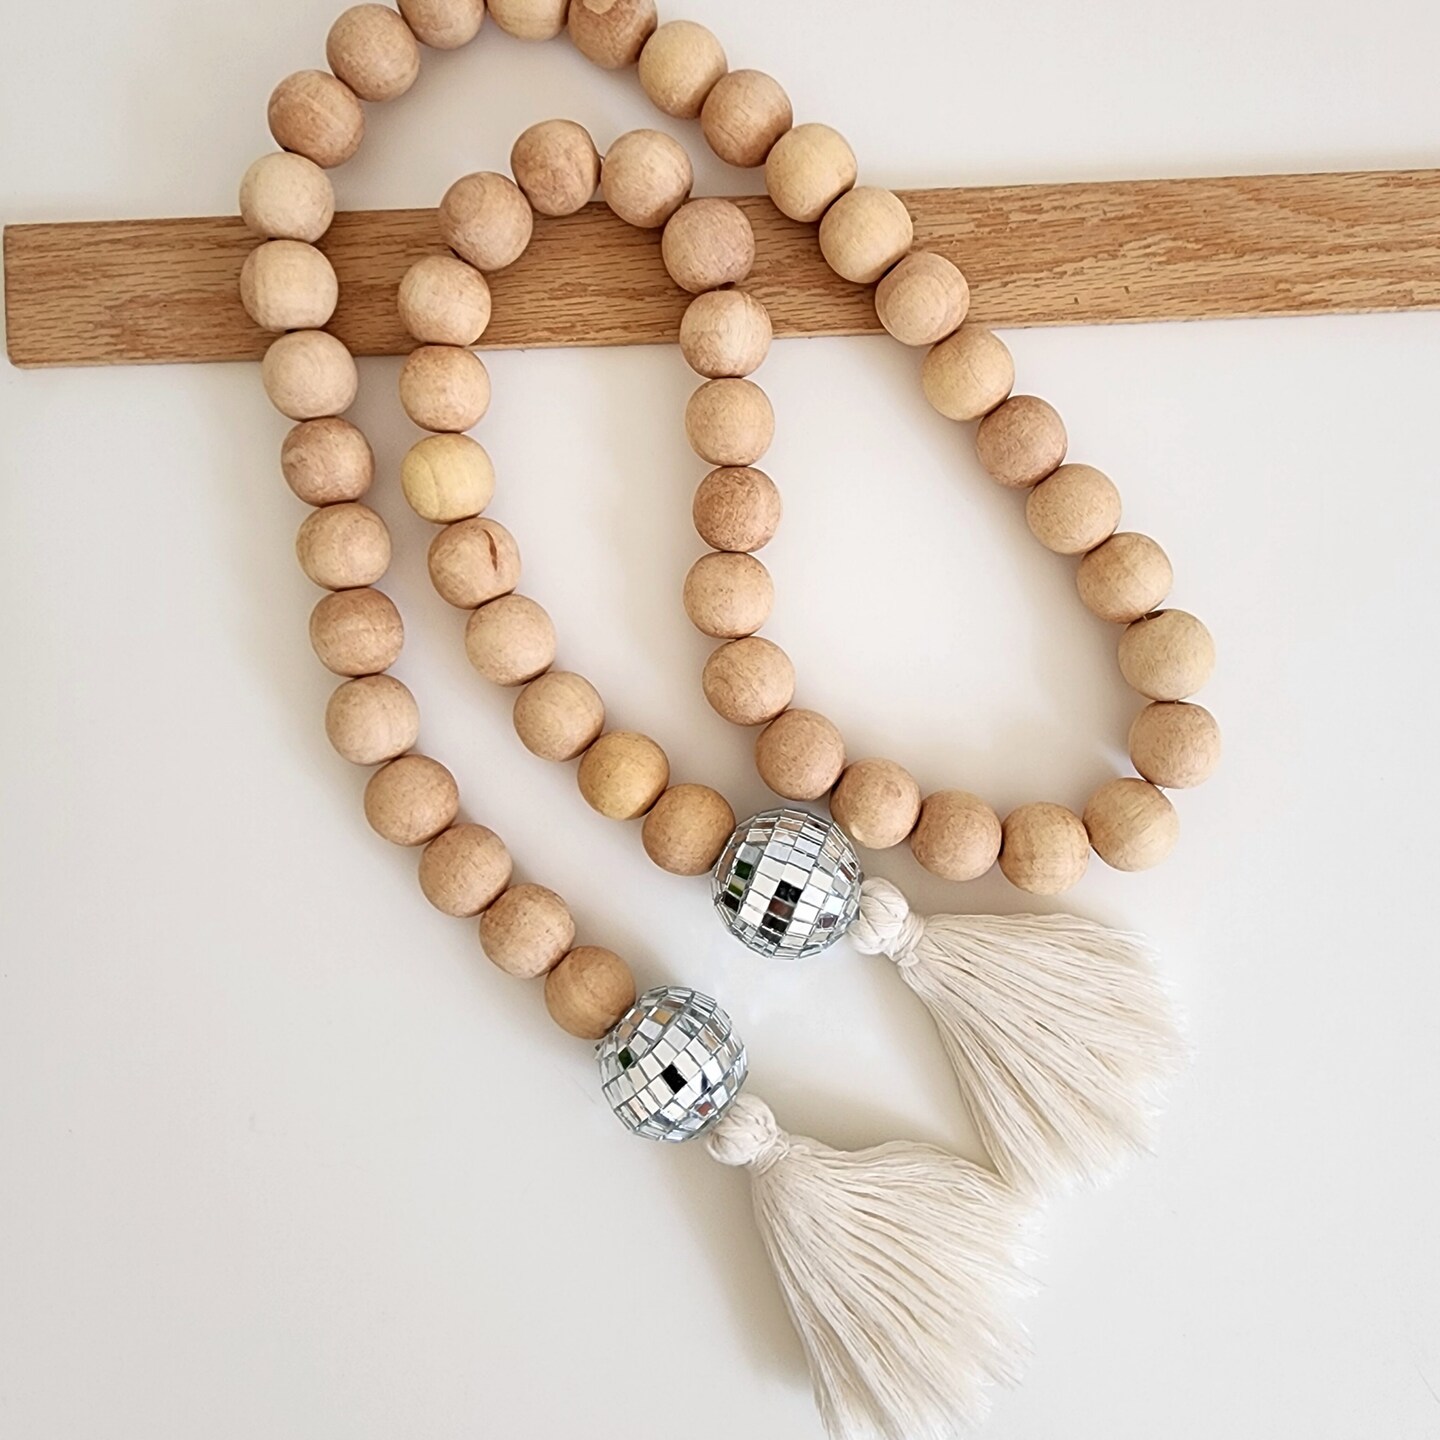 Handmade Large and Chunky wood Beads Garland with Cotton Tassels and Disco  balls, 4.5 ft long Decorative Natural Beads for Boho Home Decor